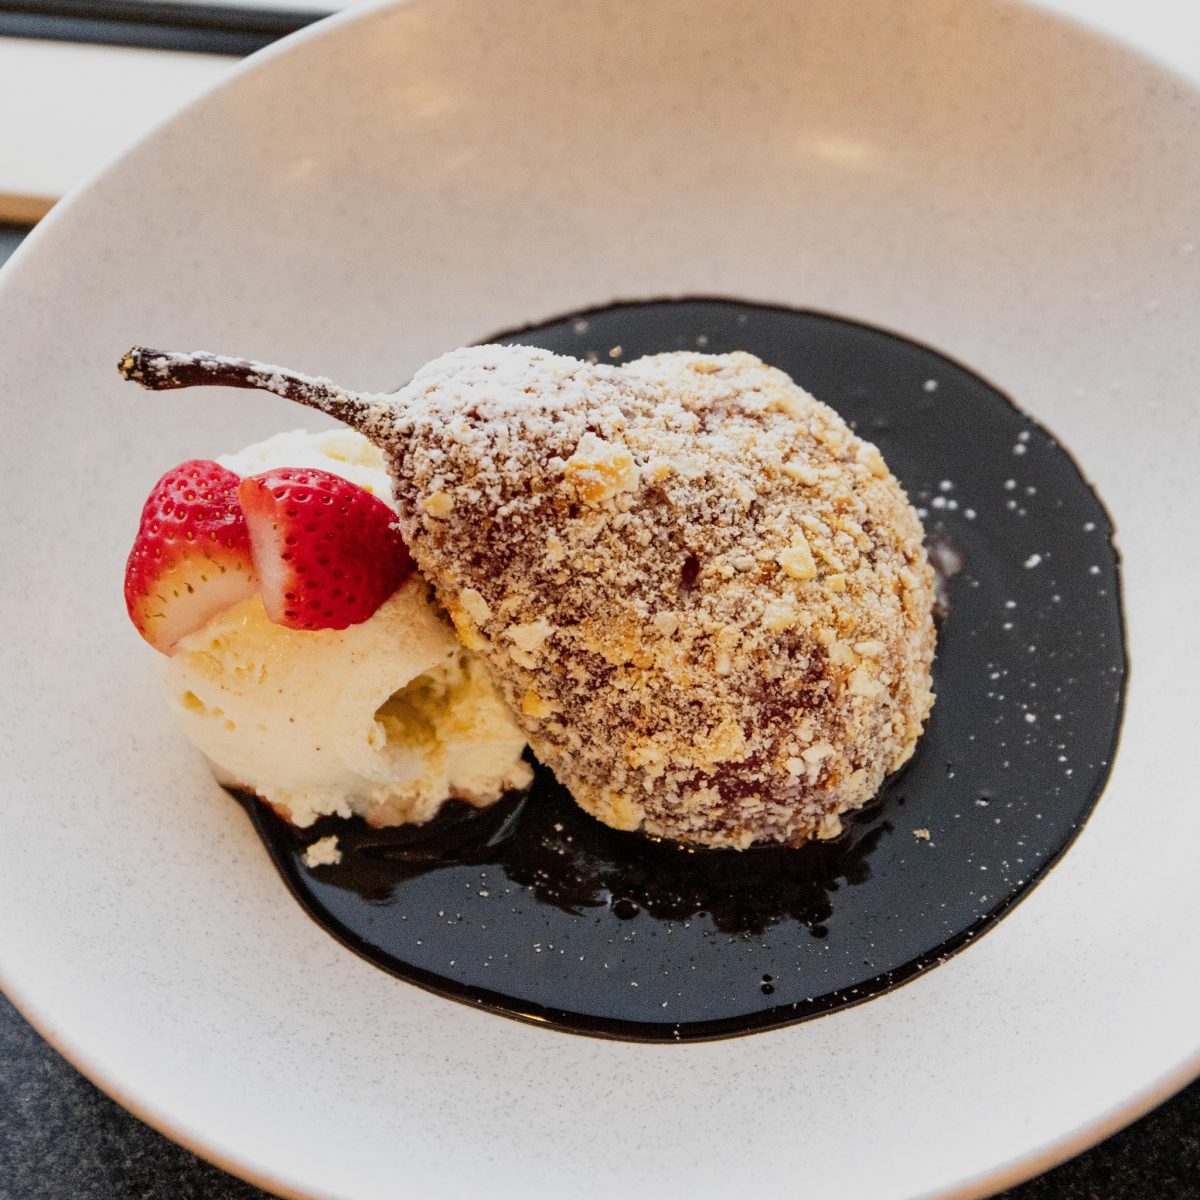 The poached pear is coated with a buttery crumb, which provides great contrast to the smooth icecream and hot fudge sauce. Photo: Supplied.